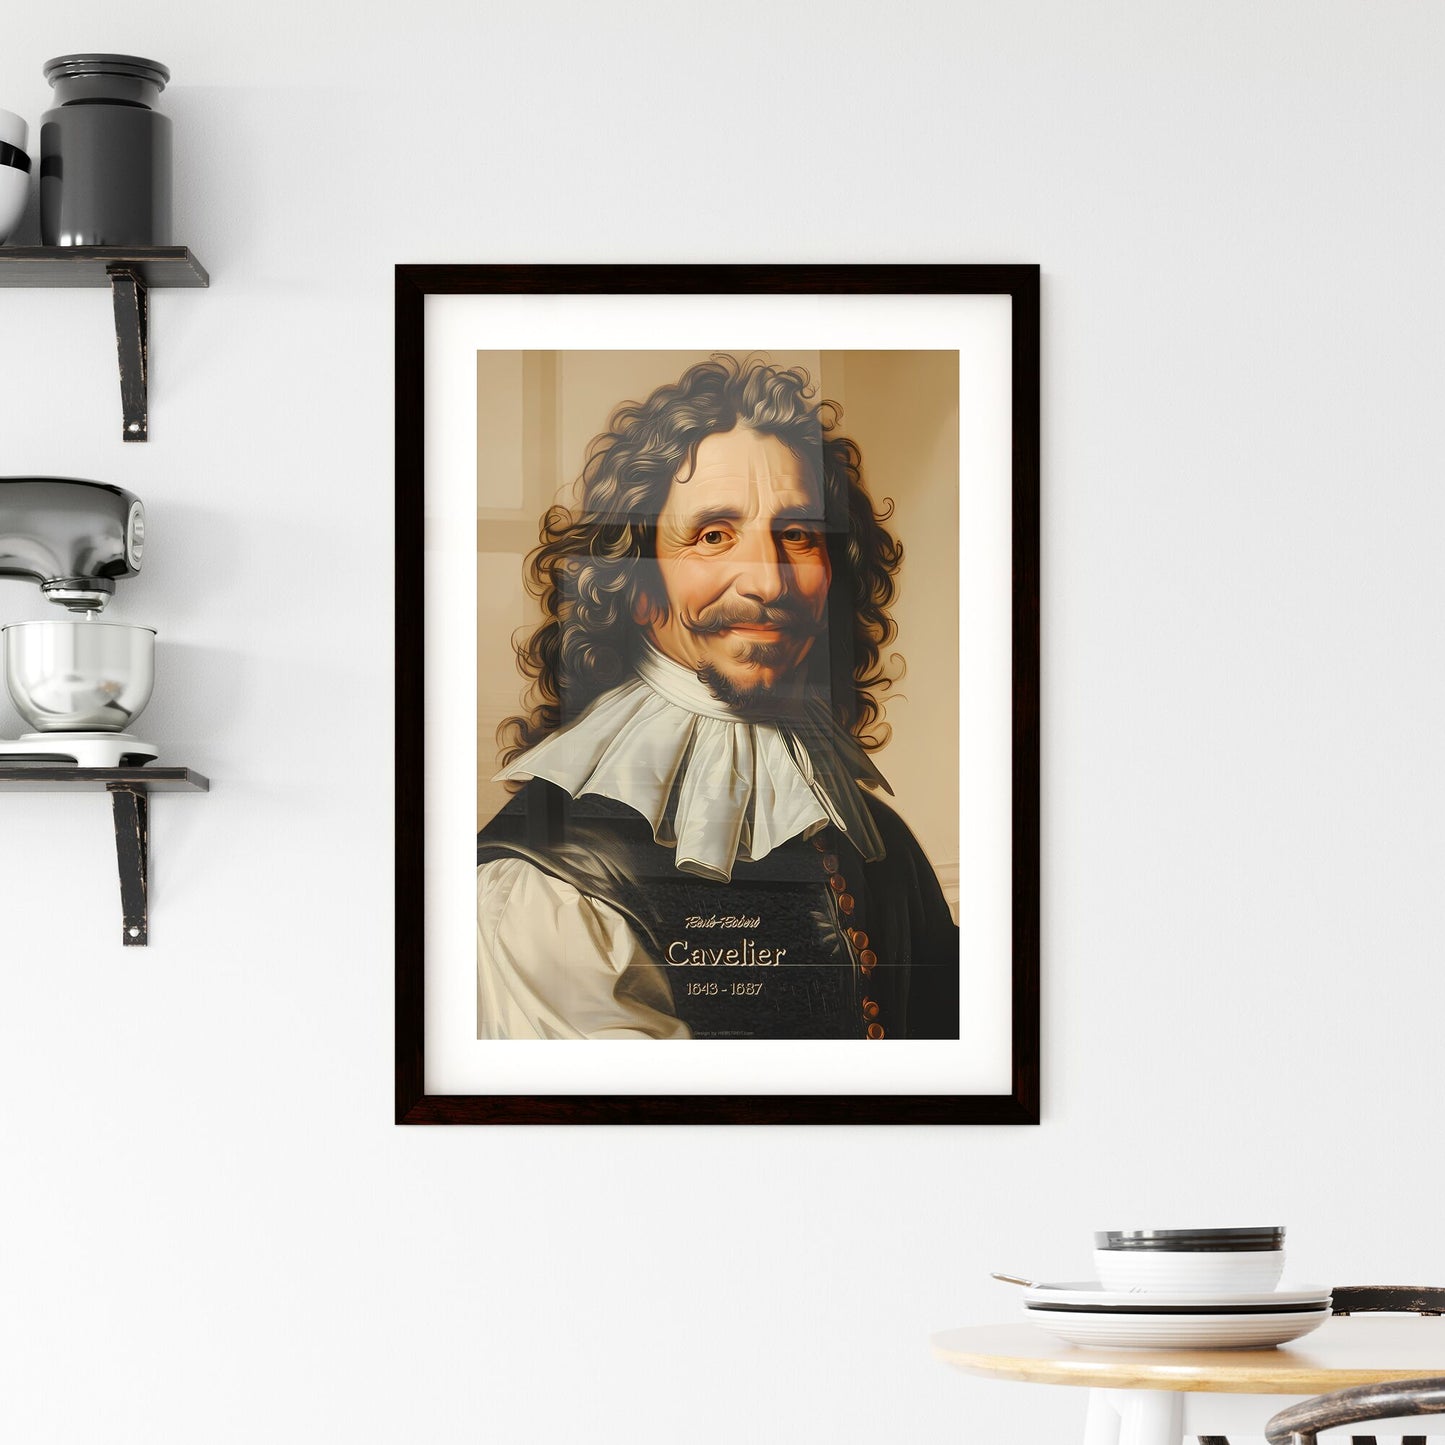 René-Robert, Cavelier, 1643 - 1687, A Poster of a man with long curly hair and a beard Default Title